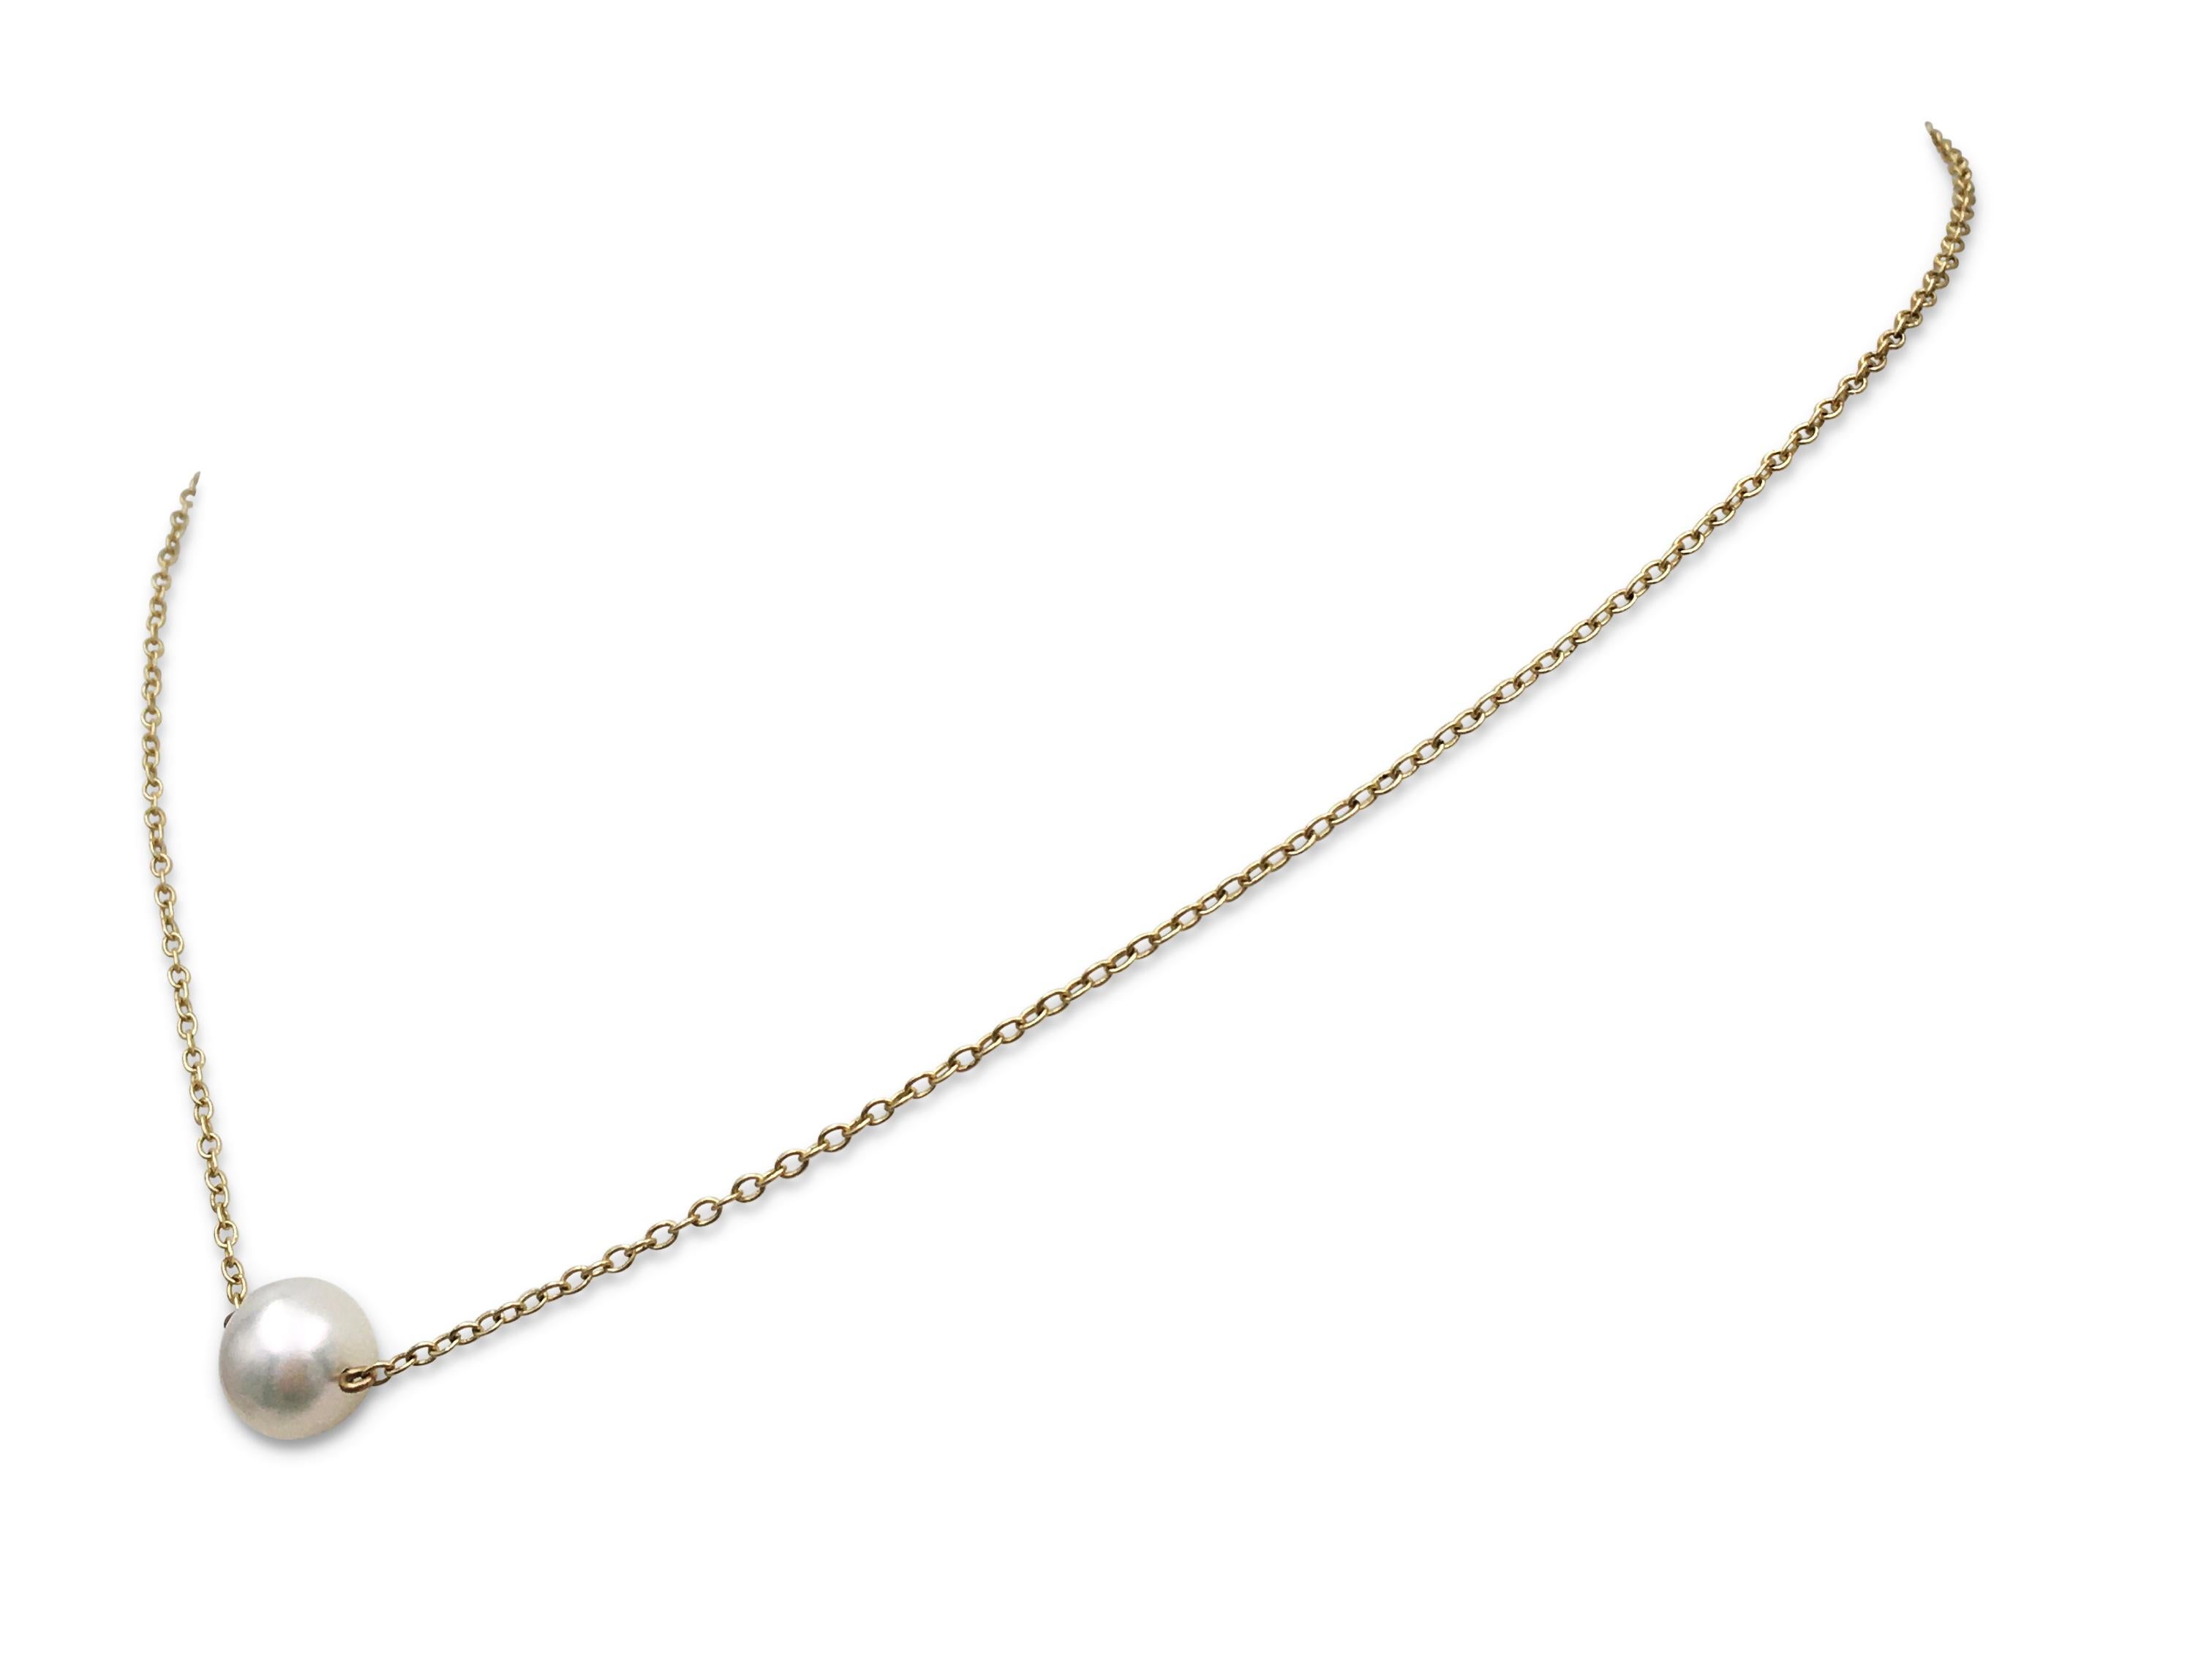 Authentic Mikimoto necklace crafted in 14 karat yellow gold and featuring a single Akoya cultured pearl measuring 7.7mm. Signed M, K14. The necklace is not presented with the original box or papers. CIRCA 2000s. 